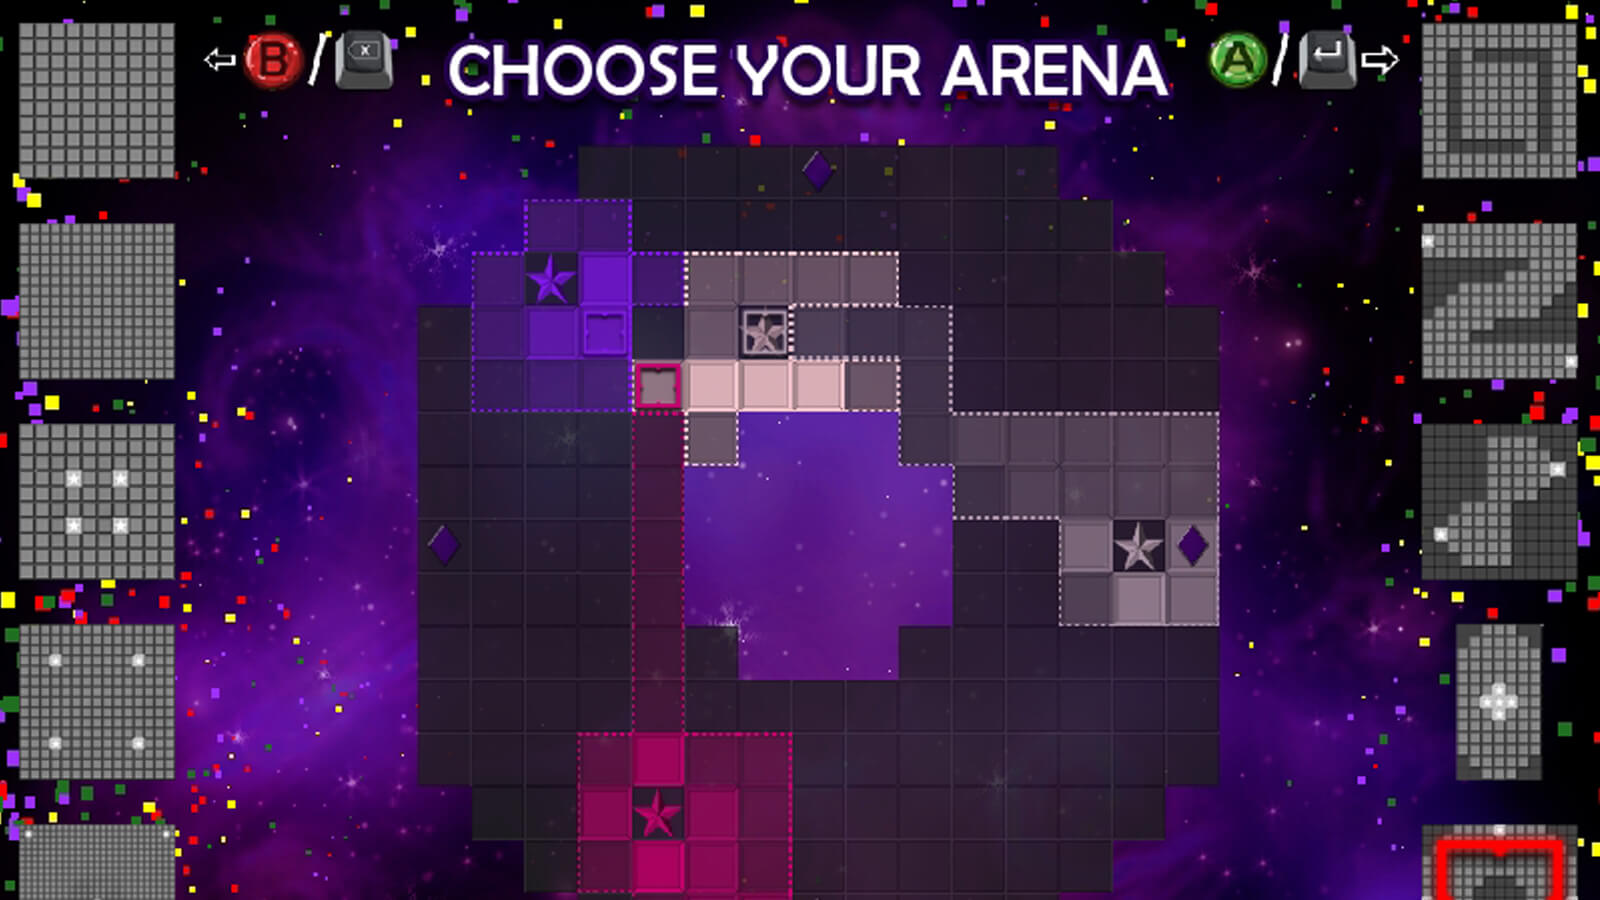 Pink, purple, and grey squares compete for grid space. 